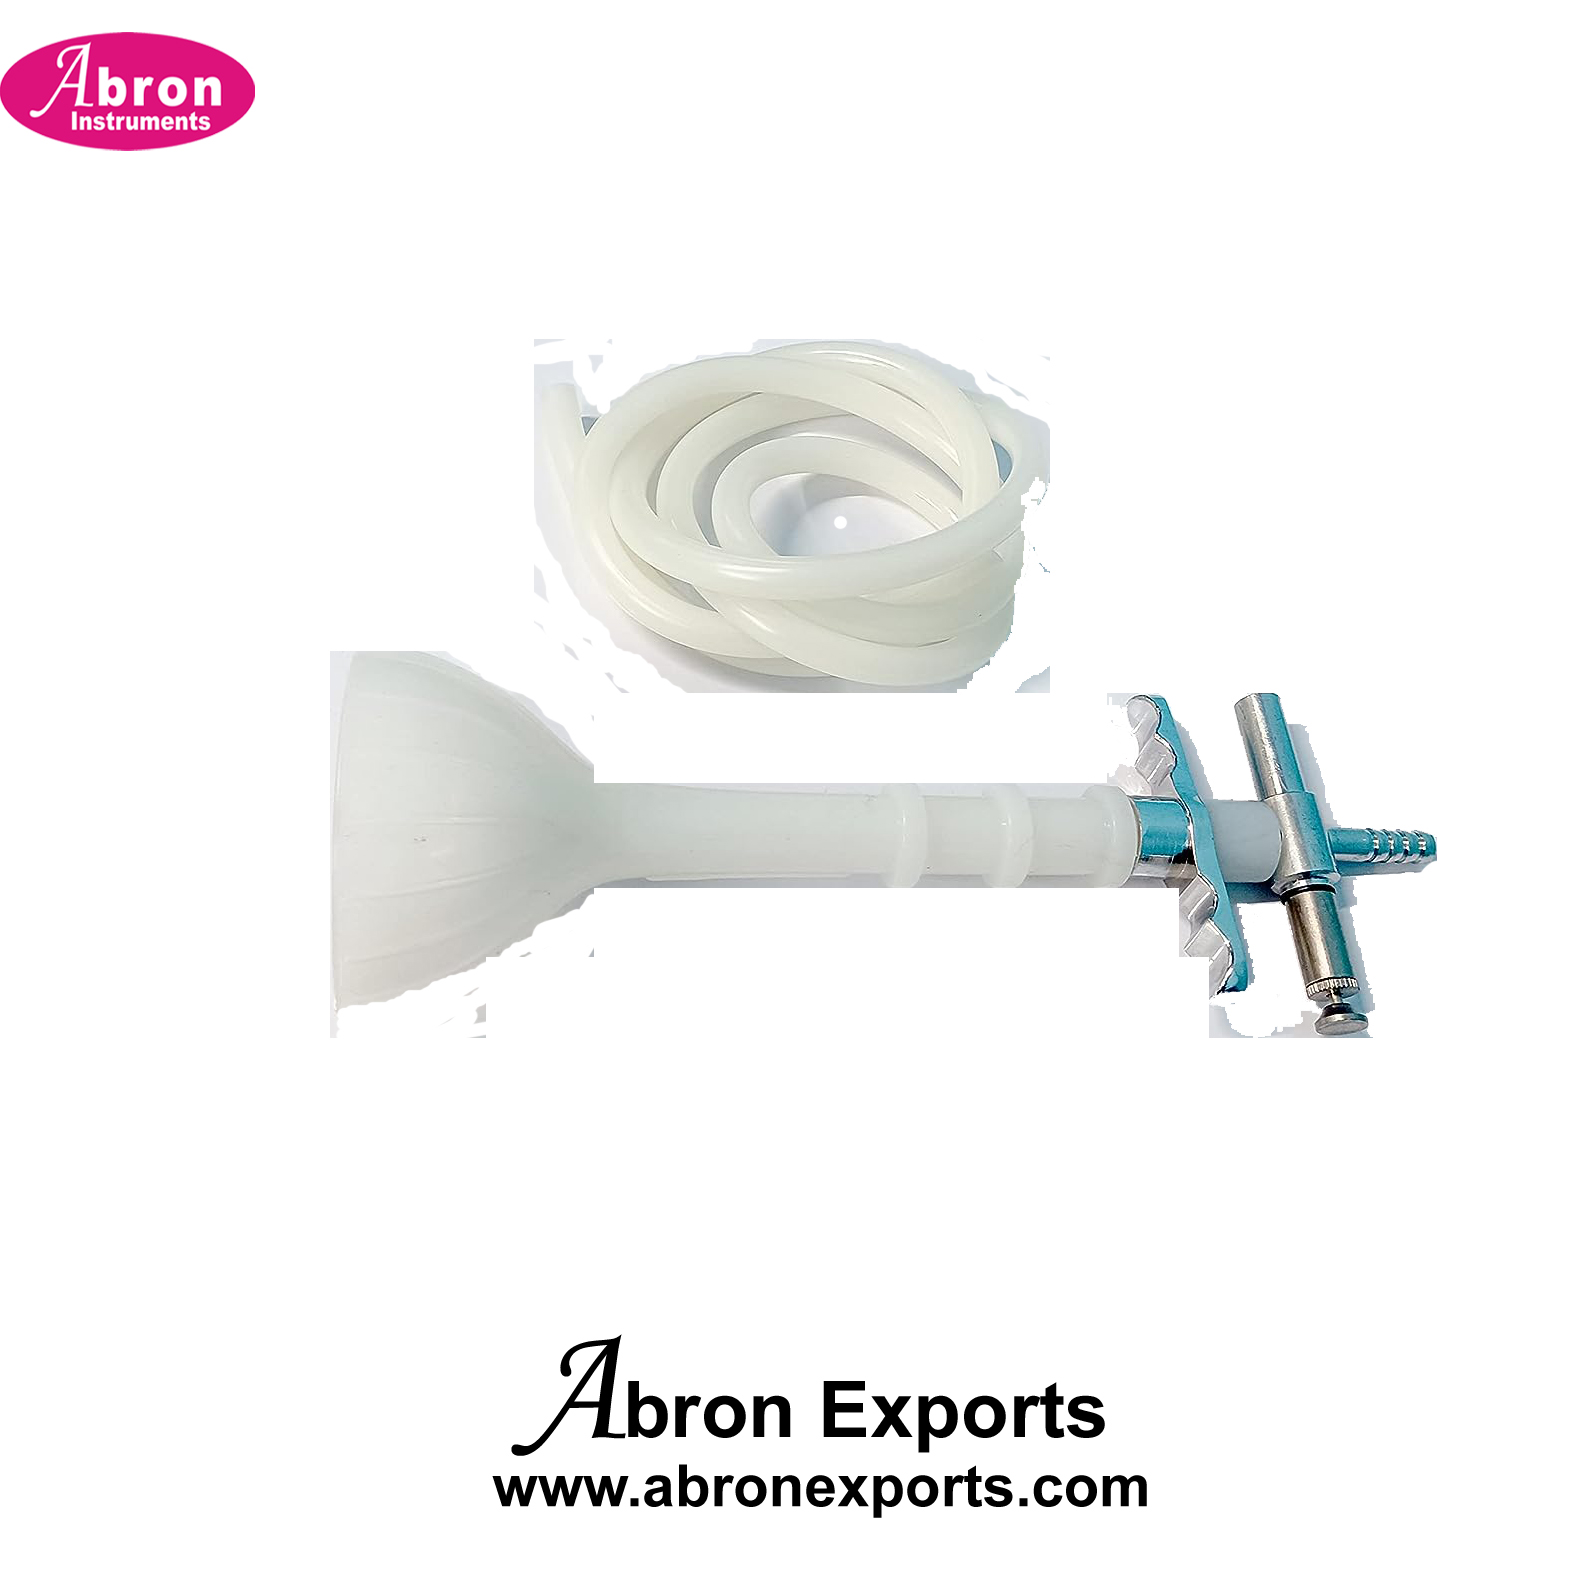 Gynecology delivery Vacuum cups silicon 70mm large Ventous Suction with 2 sizes Slic cups hospital Nursing Home Abron ABM-2312DC 